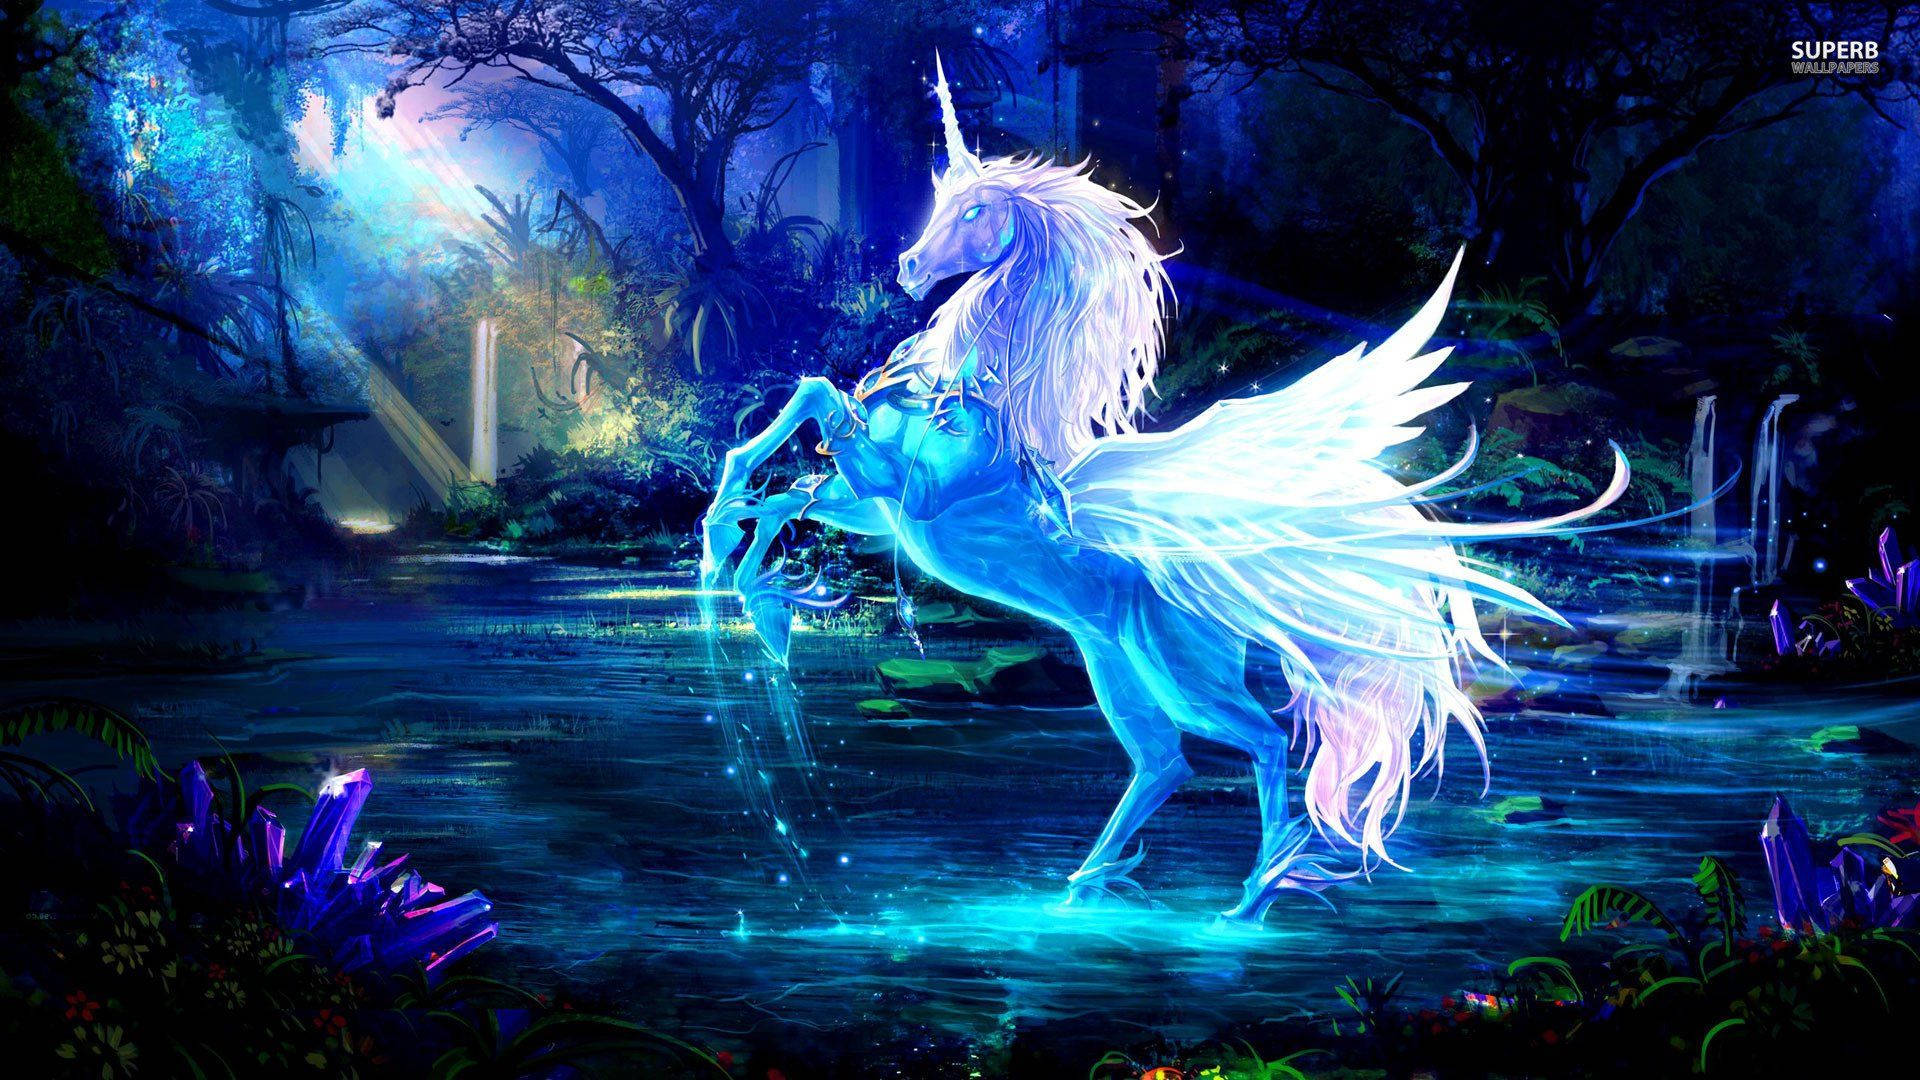 Image  A mythical, rainbow-colored Unicorn looks ahead with a determined expression Wallpaper